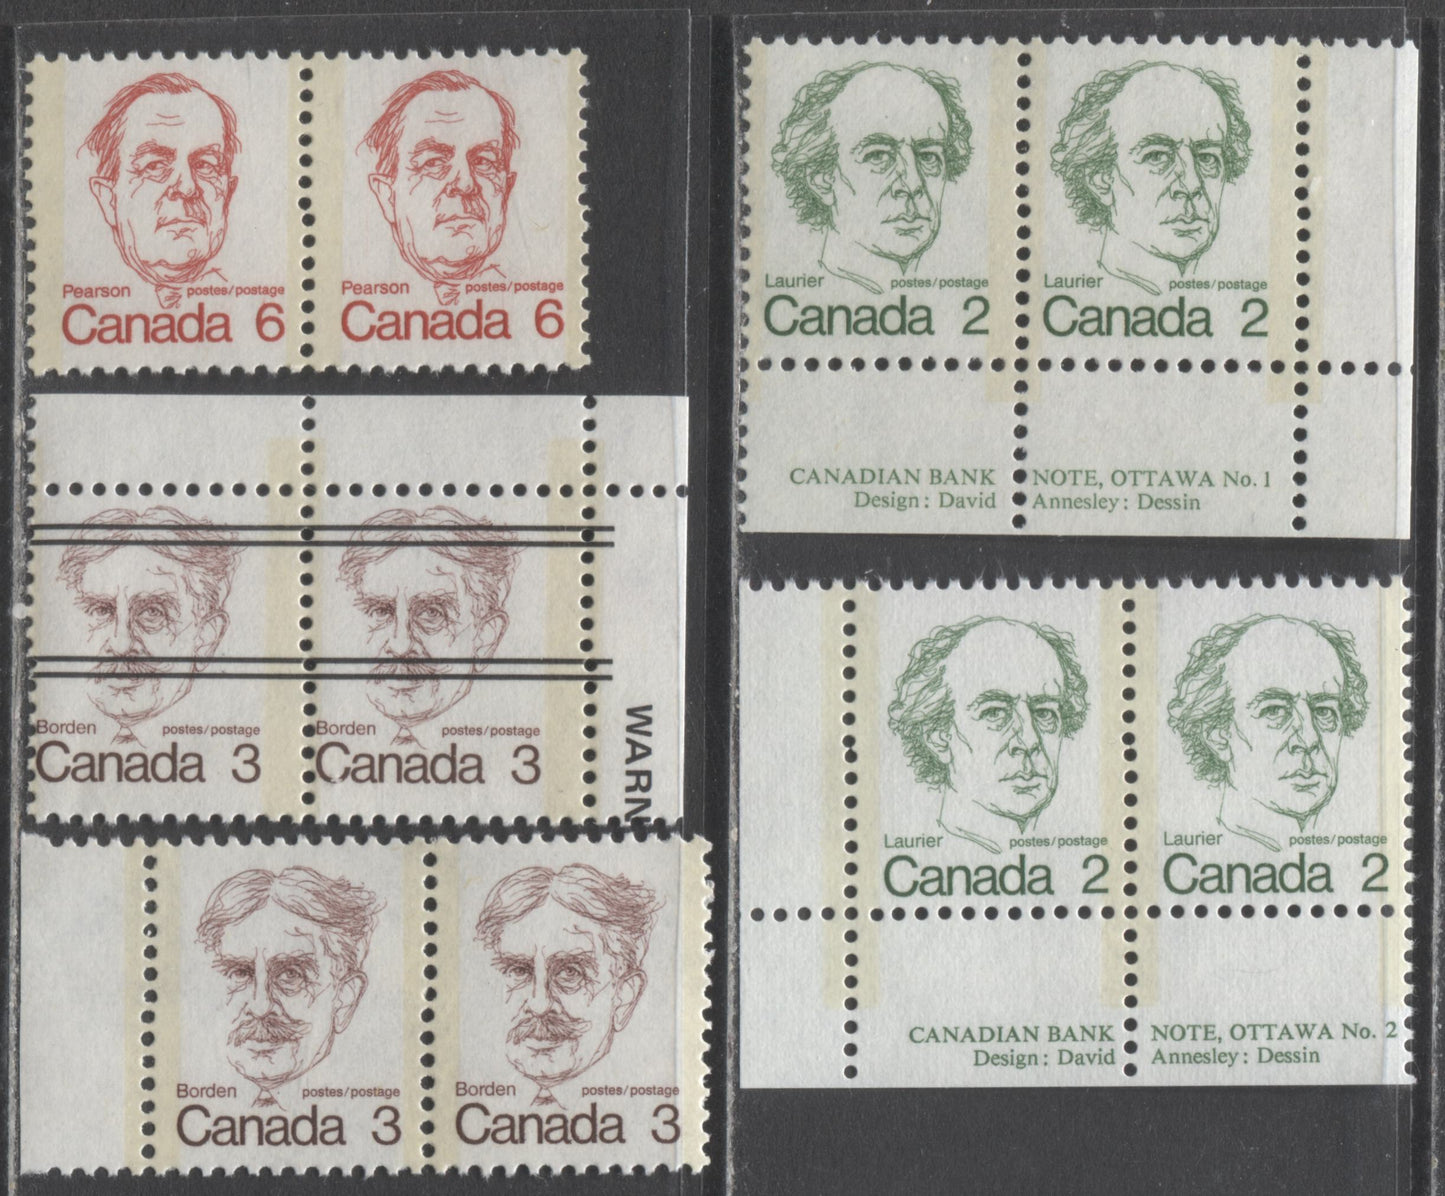 Lot 317 Canada #587iii,var, 588,xx, 591iv 2c/6c Green/Dark Red Sir Wilfrid Laurier/Lester B Pearson, 1972-1974 Caricature Issue, 5 F/VFNH Plate Pairs Showing Misalignments Between Comb Perf Strikes & Narrow Spacing Between Comb Strikes